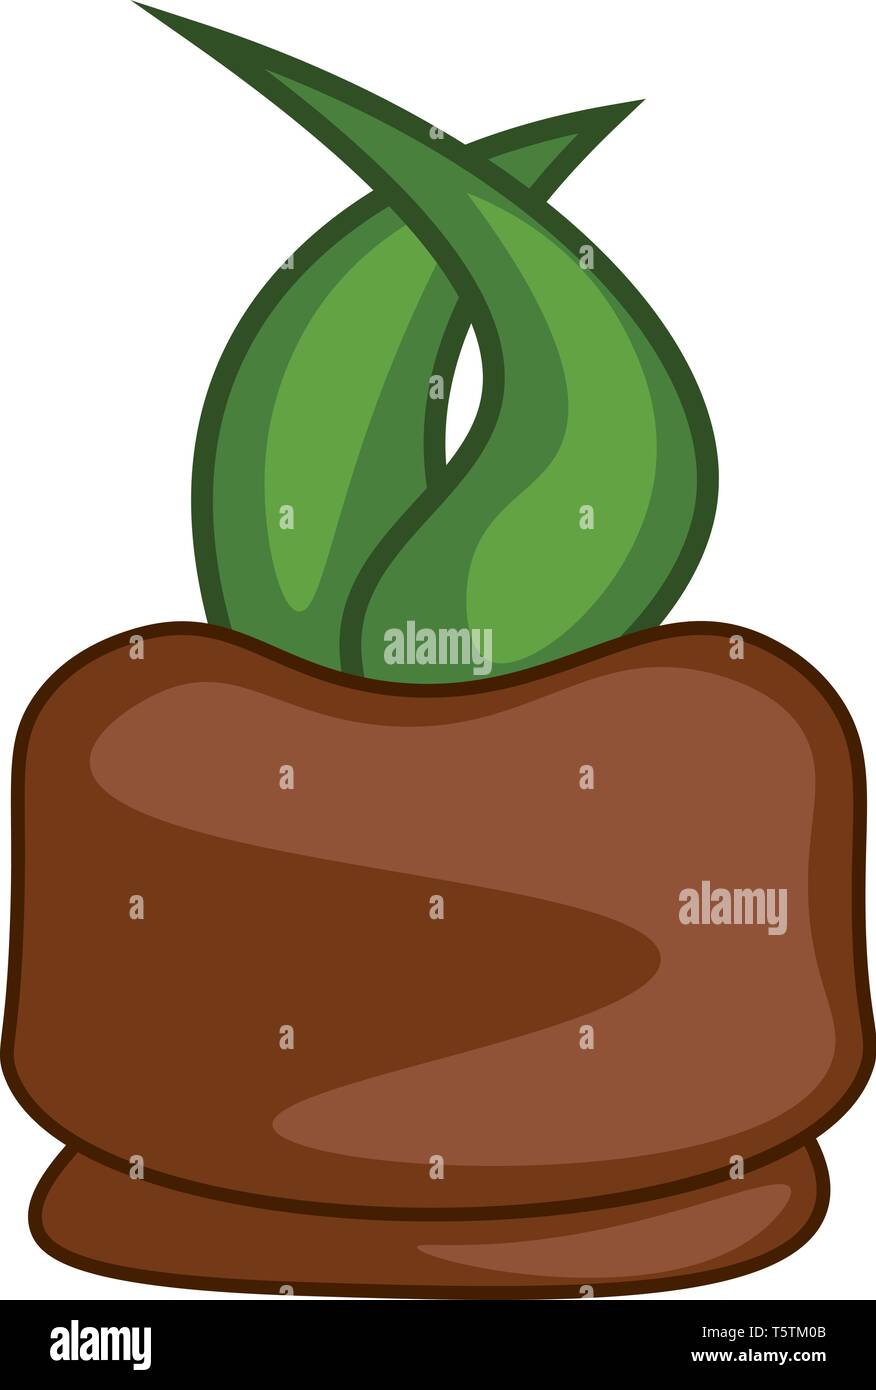 The clipart of a cartoon carrot plant that shows only the anterior part with orange-colored edible part topped with two leaves vector color drawing or Stock Vector